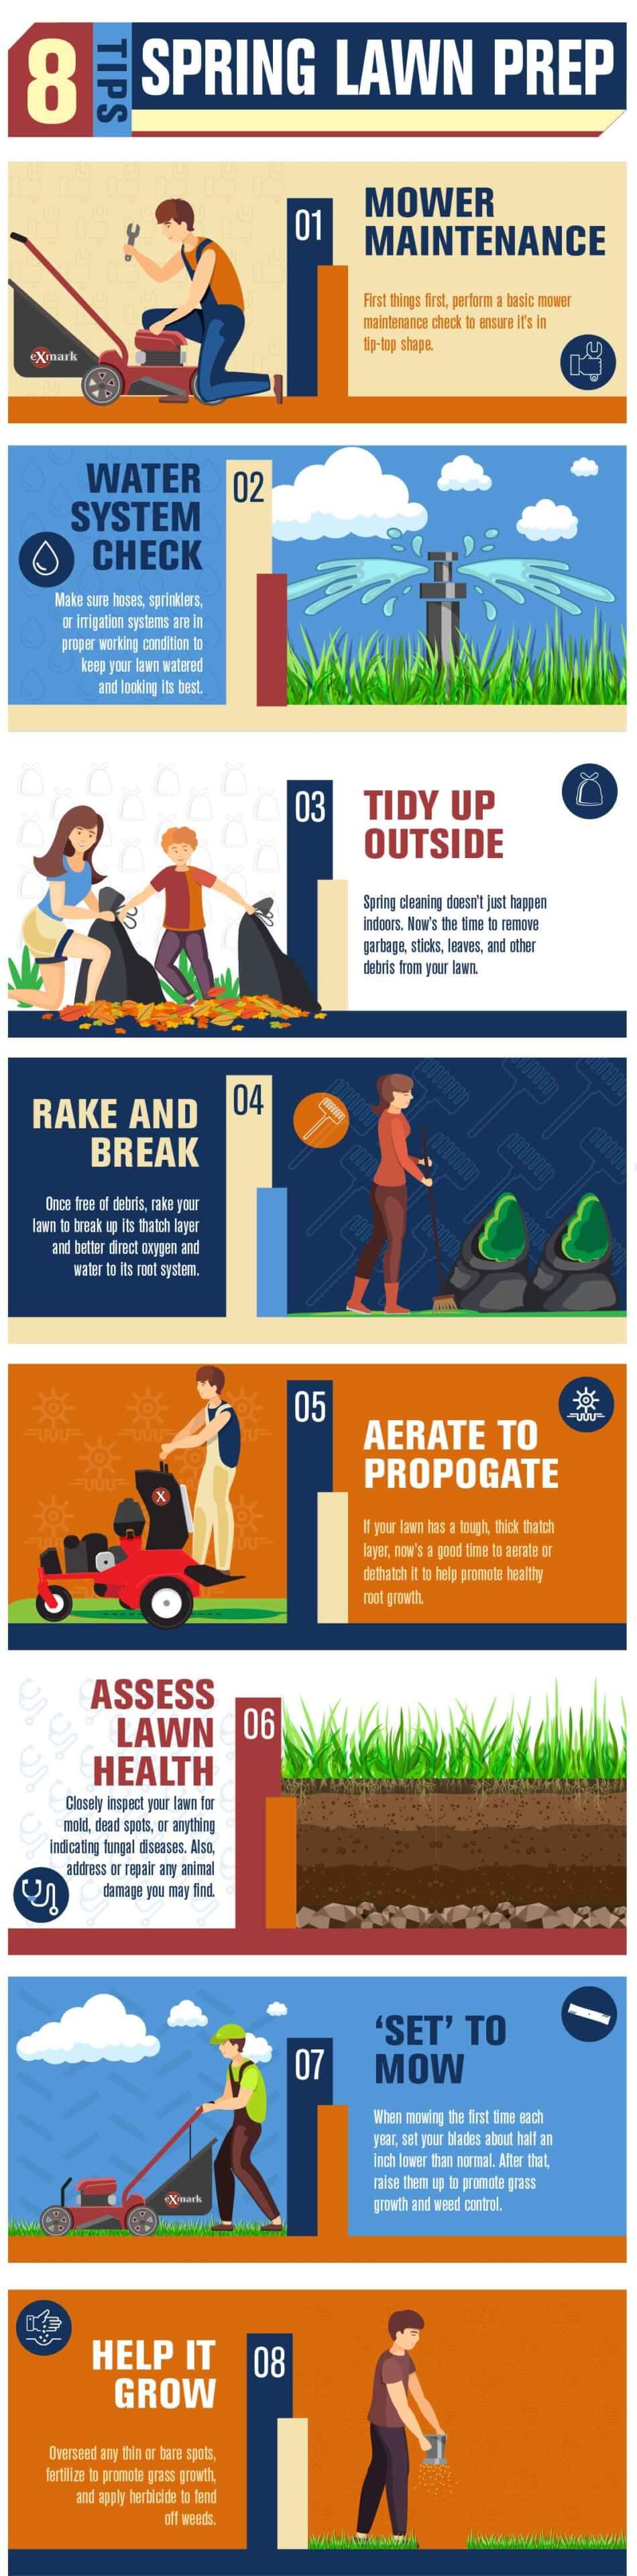 Spring Lawn Preparation Infographic